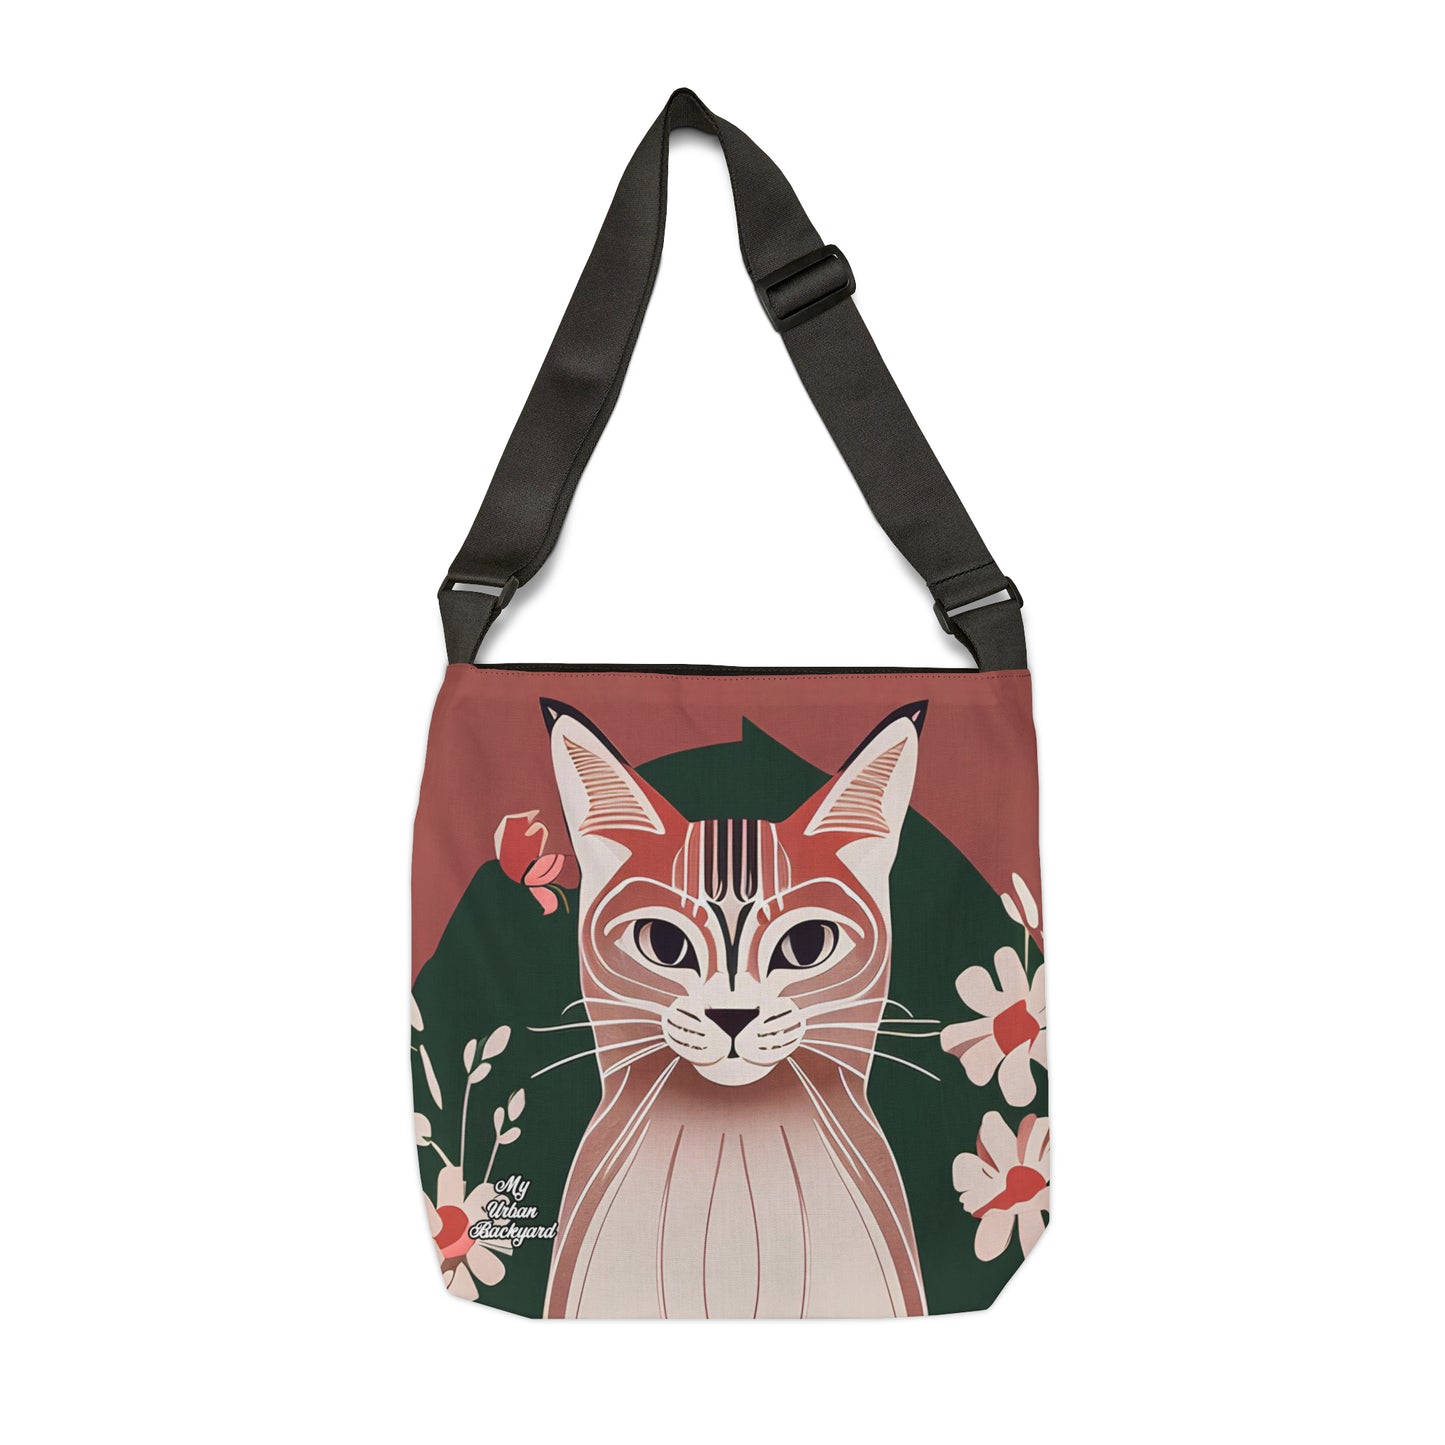 Art Deco Tabby, Tote Bag with Adjustable Strap - Trendy and Versatile